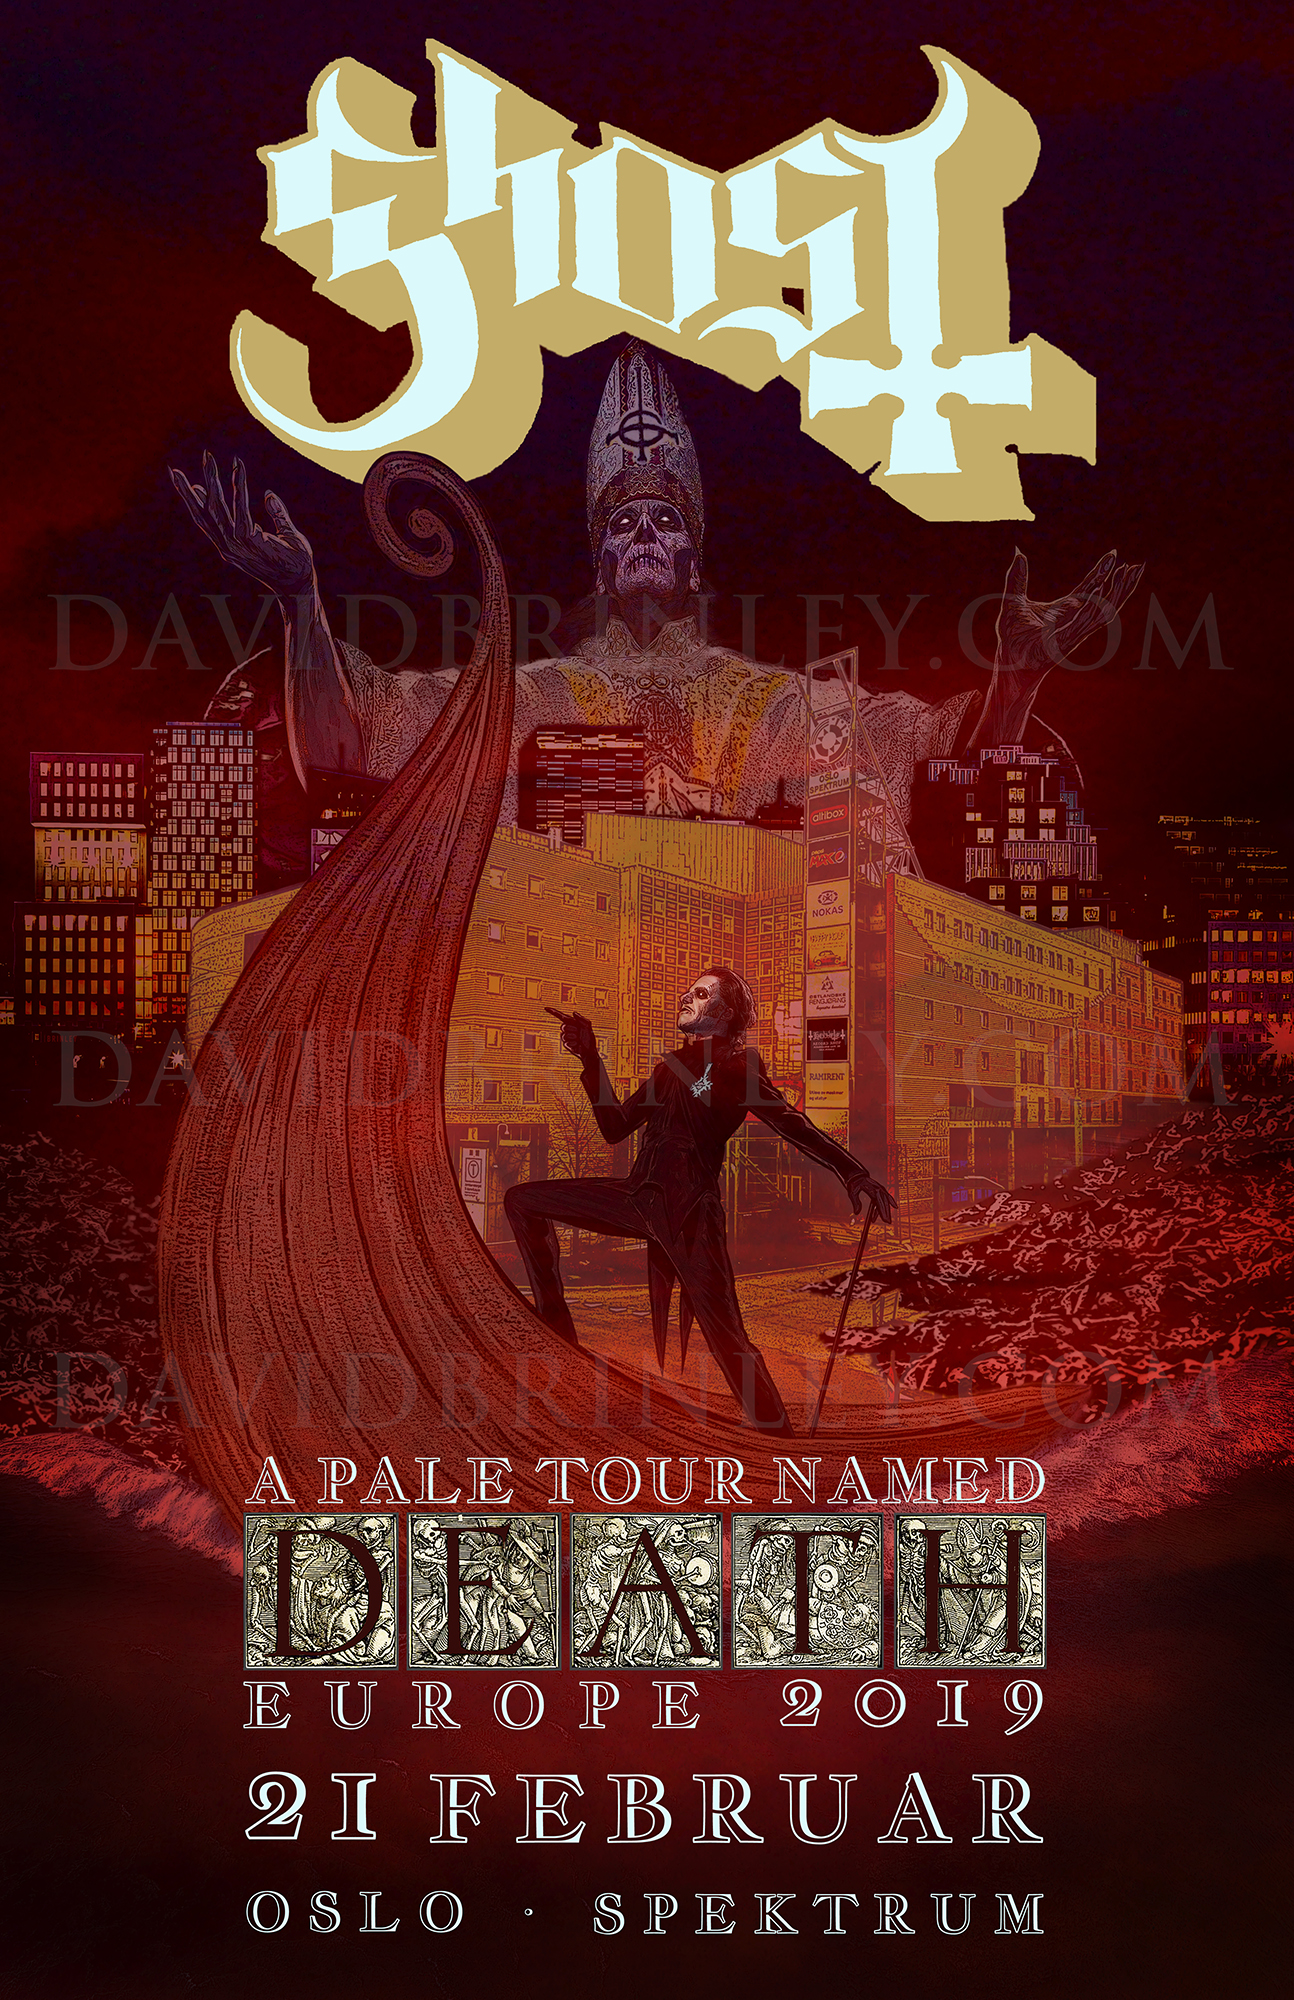   GHOST | Oslo Norway Spektrum | February 21, 2019   A Pale Tour Named Death Official poster  David M. Brinley | Illustrator Designer  Acrylic and Digital 